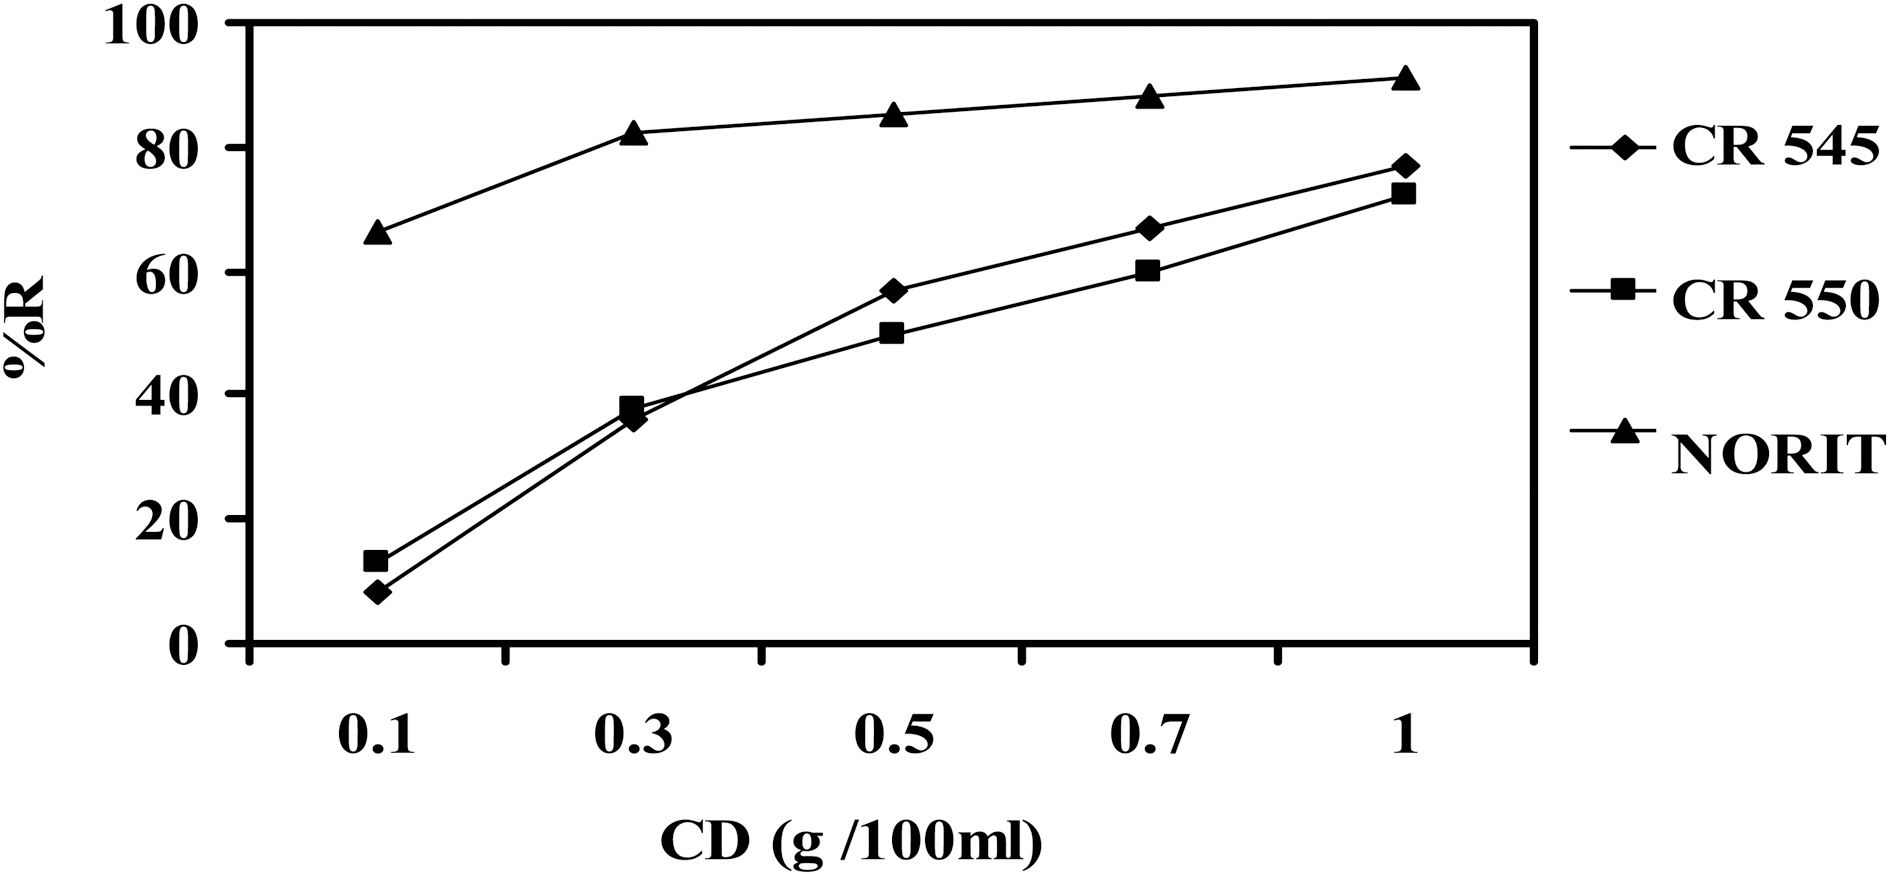 Comparison of decolorization capacity (%R) by NORIT- Carbon (N) and selected activated carbons as function of carbon dose (CD).